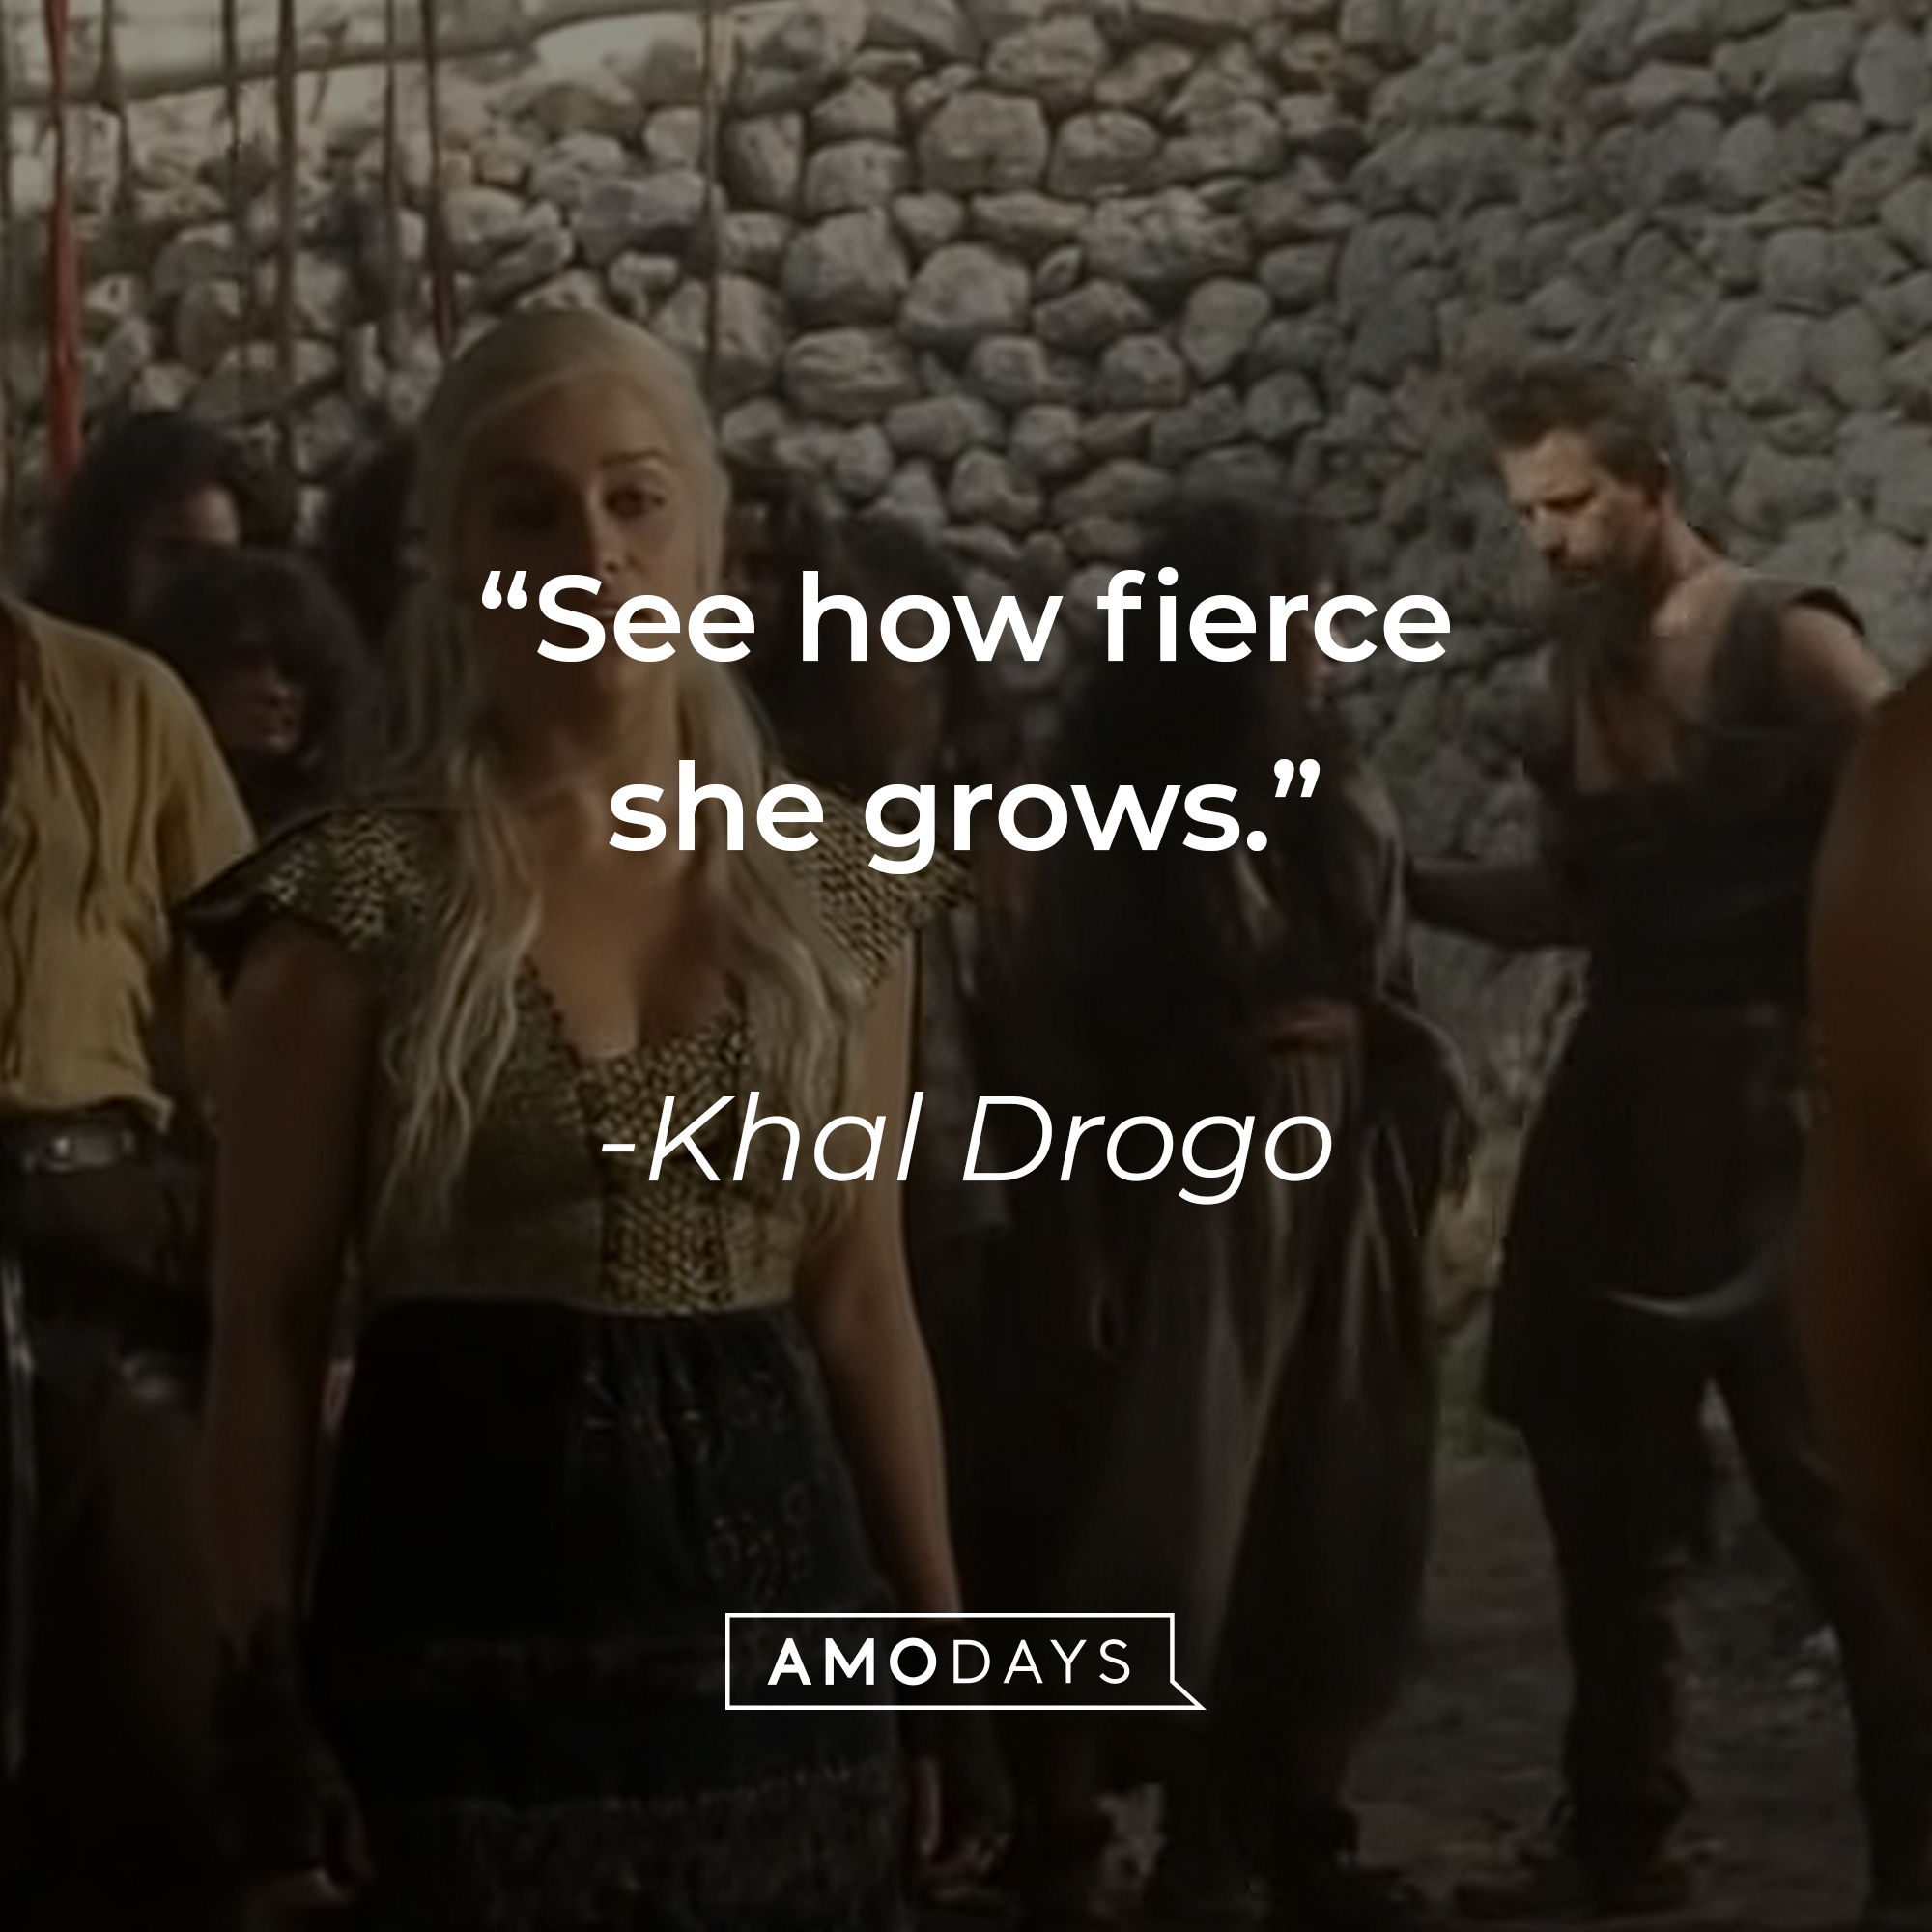 Khal Drogo's quote: "See how fierce she grows." | Source: youtube.com/gameofthrones